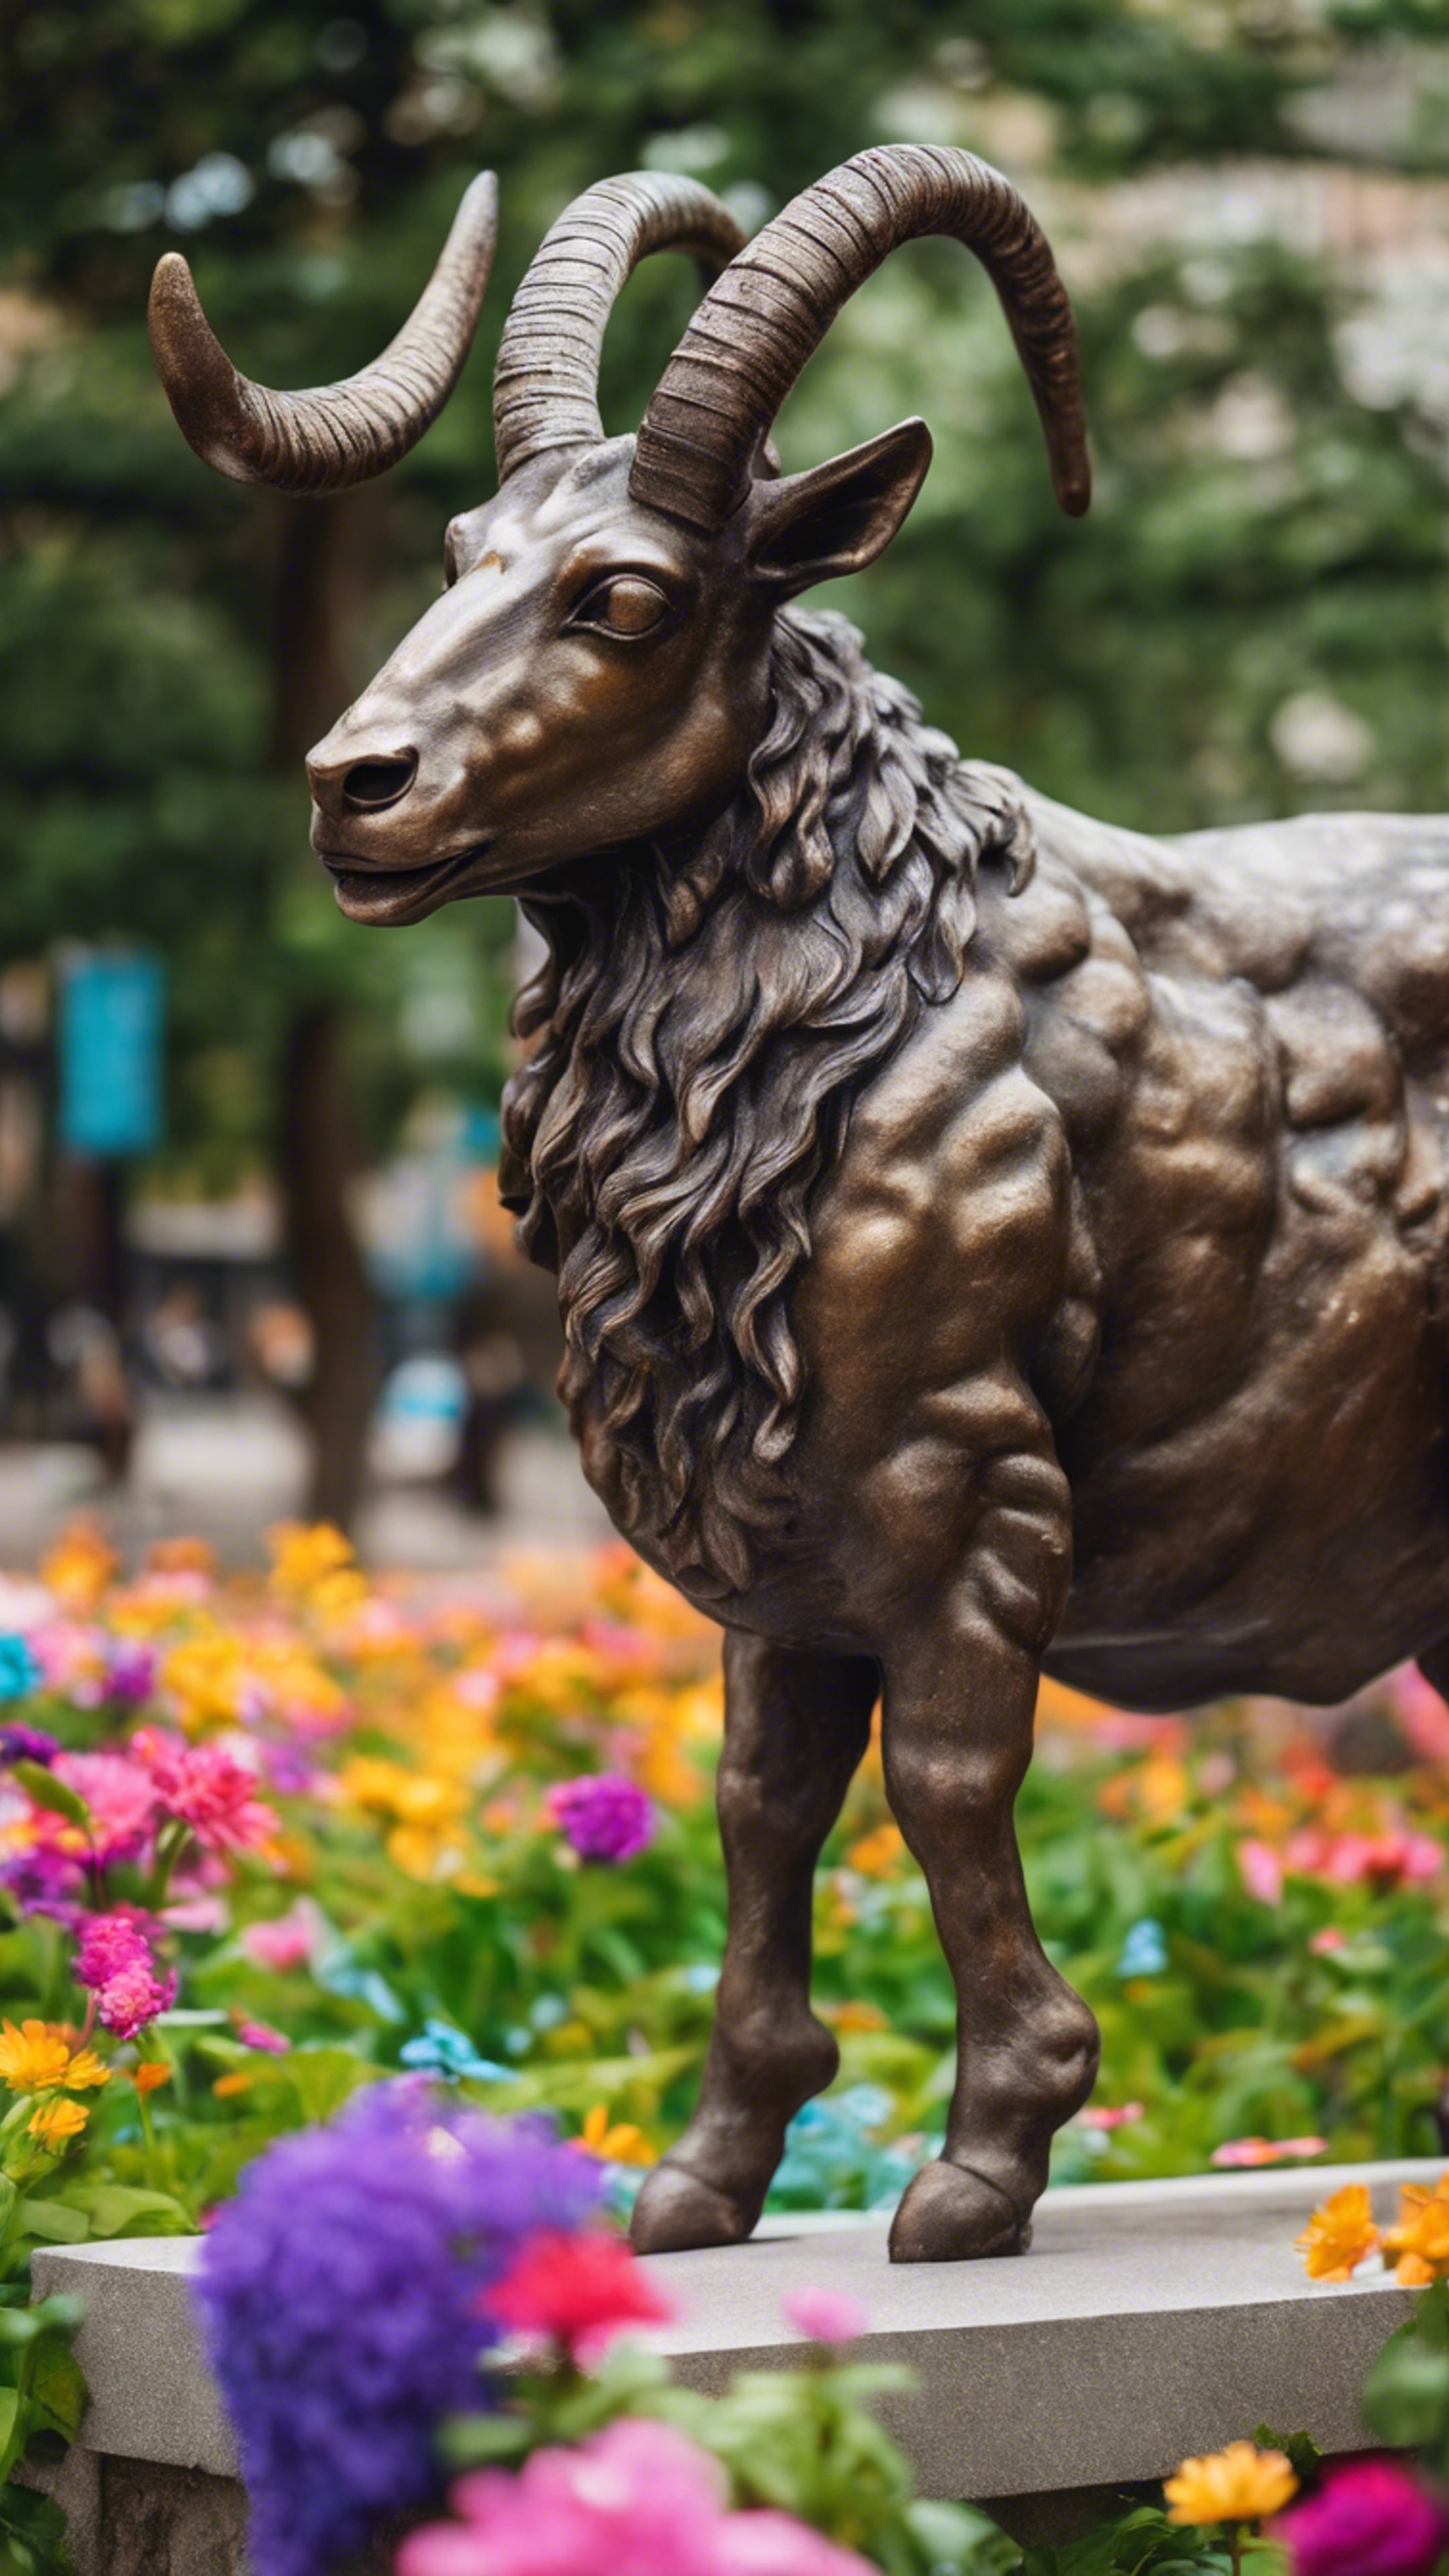 A detailed bronze statue of a Capricorn in a lively city park, surrounded by colorful flowers. Wallpaper[4693ead8121f483a9fe2]